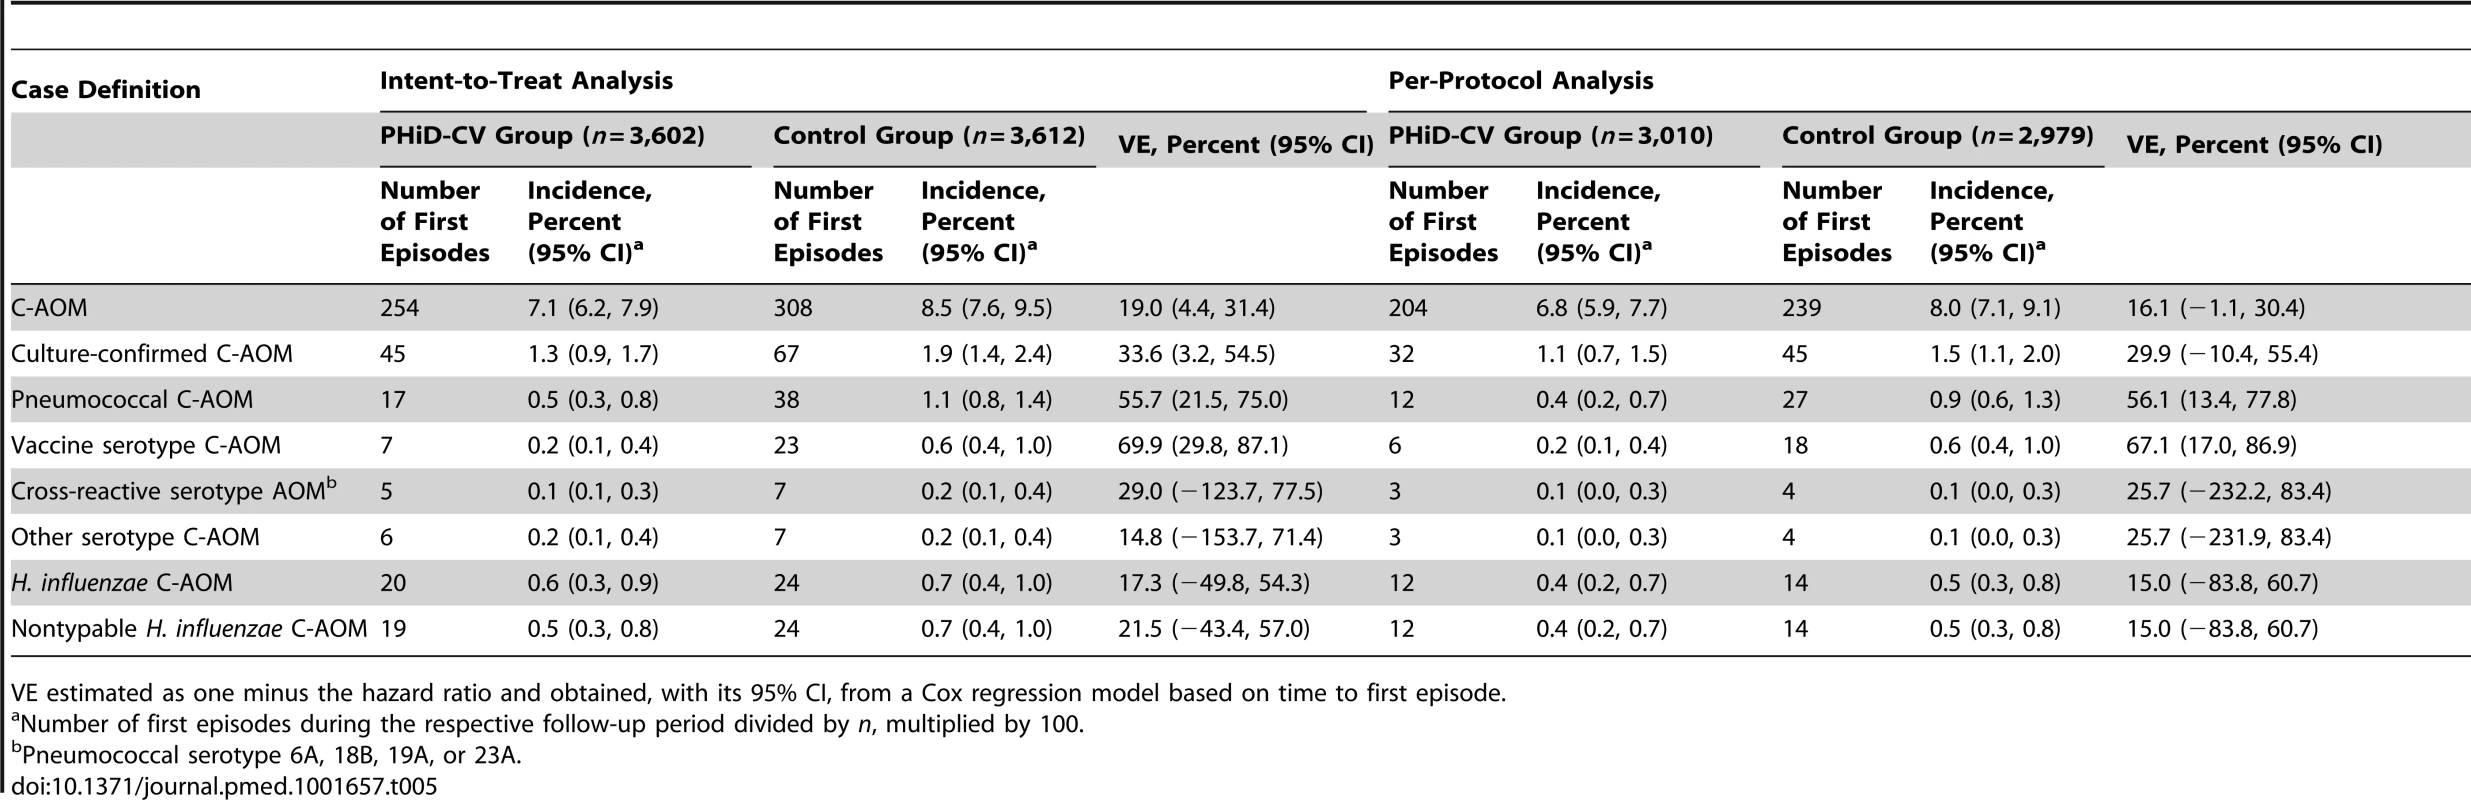 Efficacy of PHiD-CV against first acute otitis media episodes (end-of-study analysis).